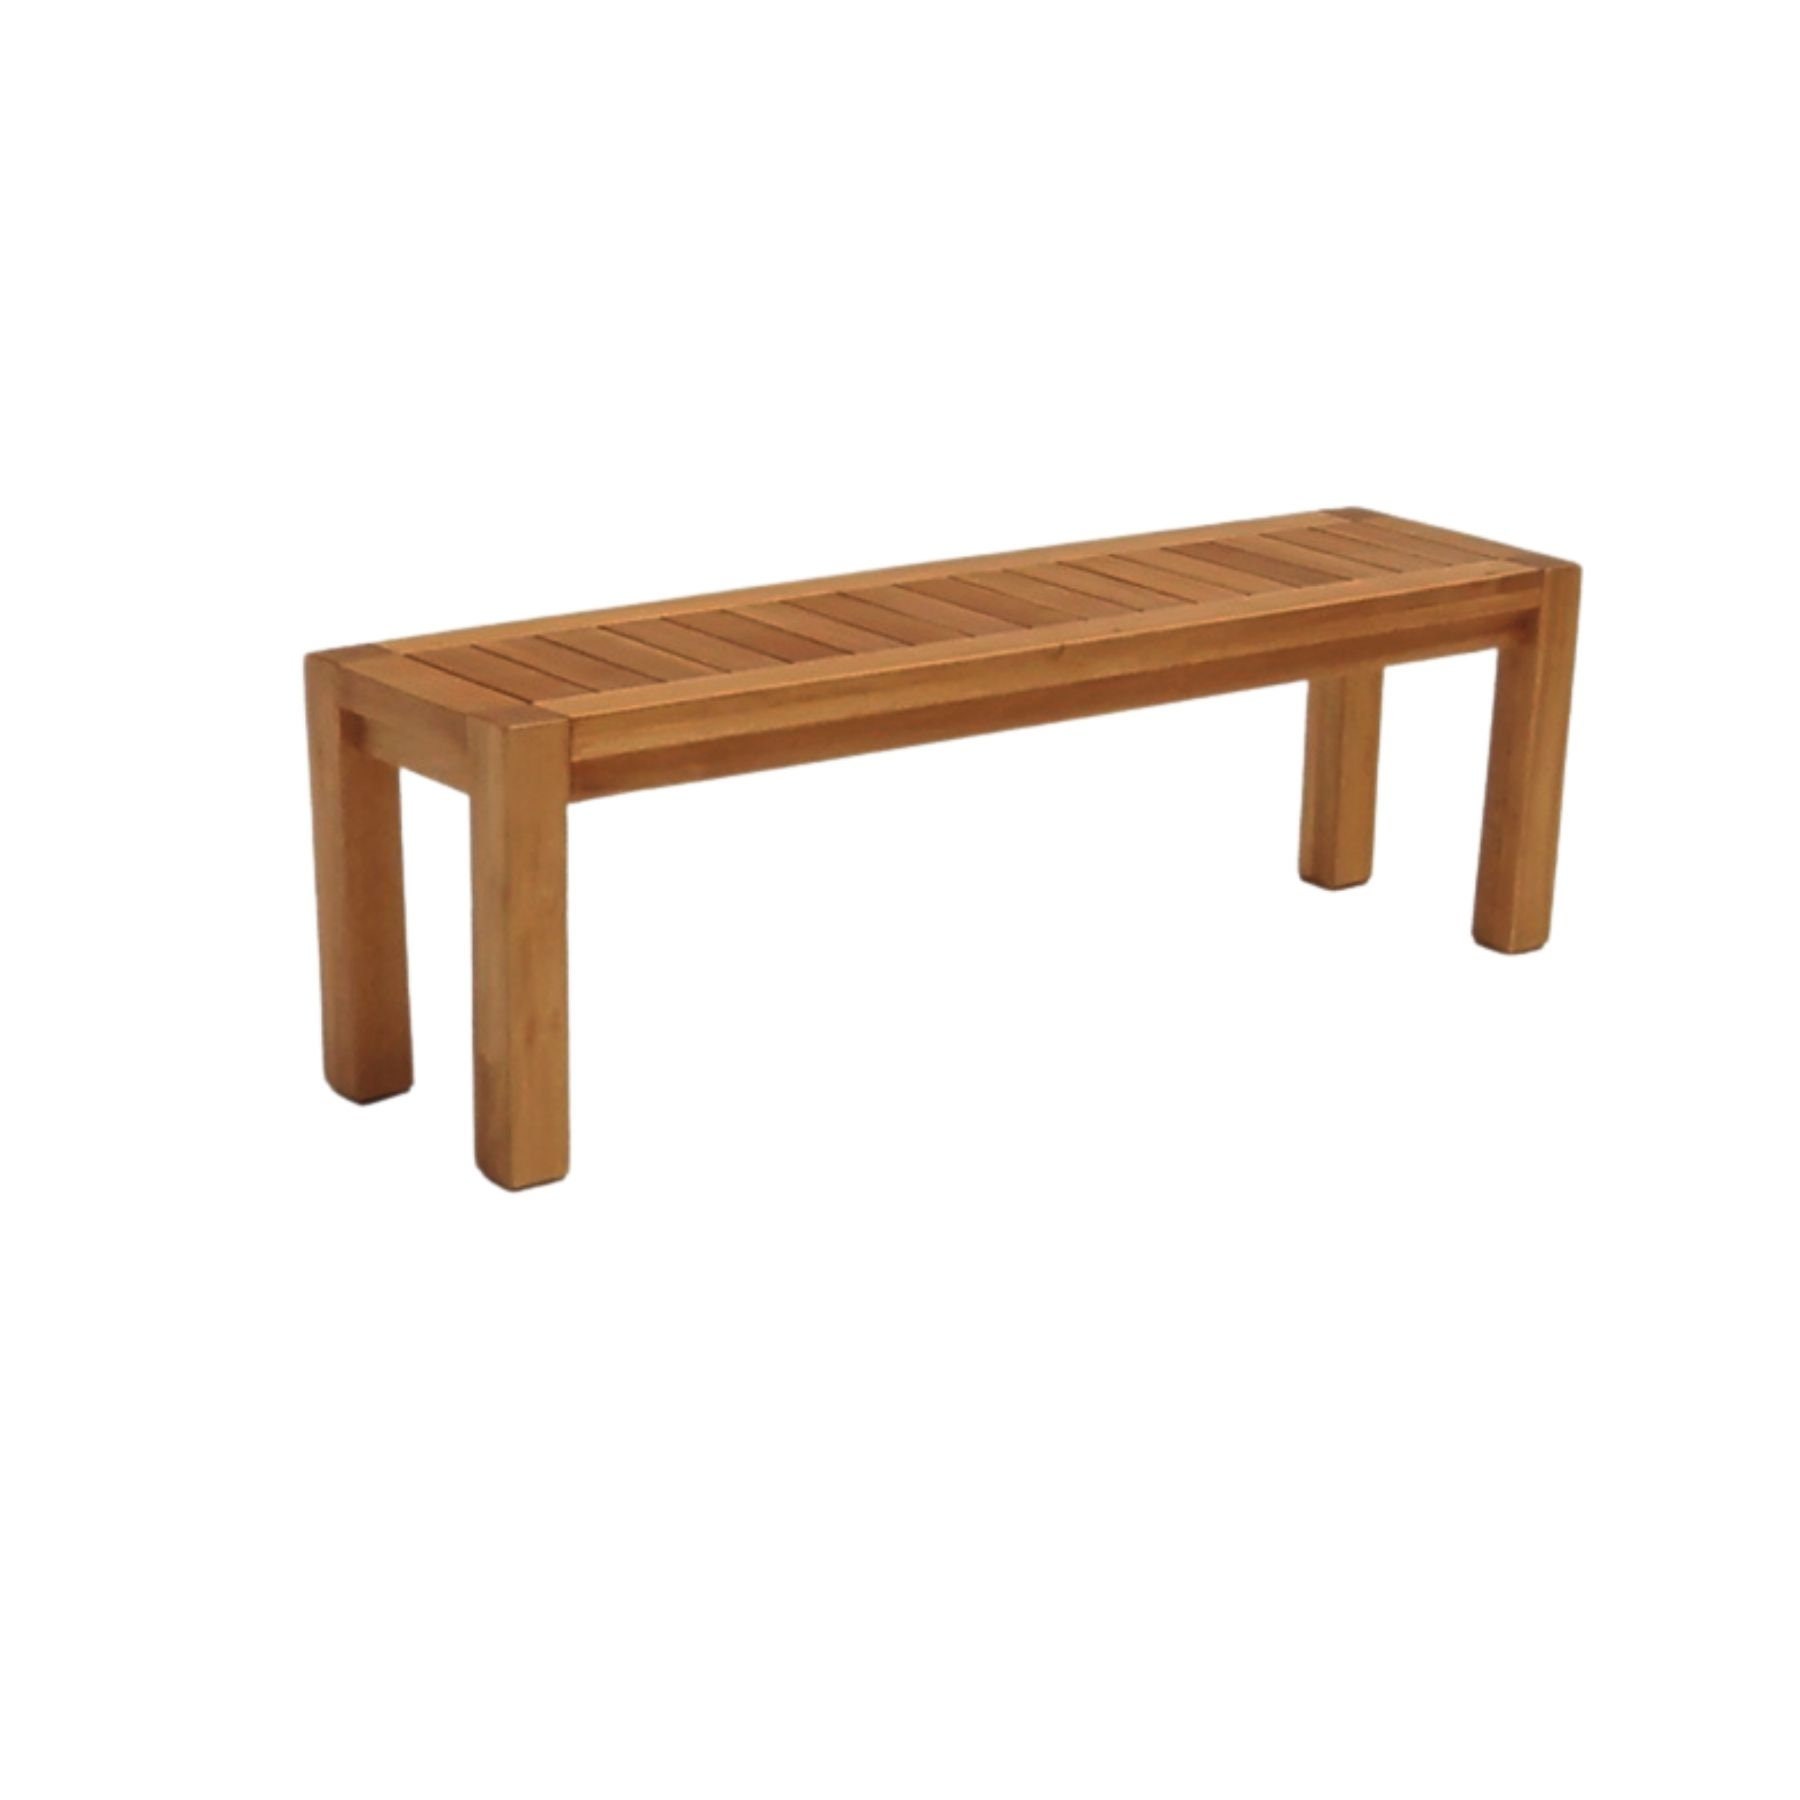 Amish Cedar Wood Traditional Backless Outdoor Bench